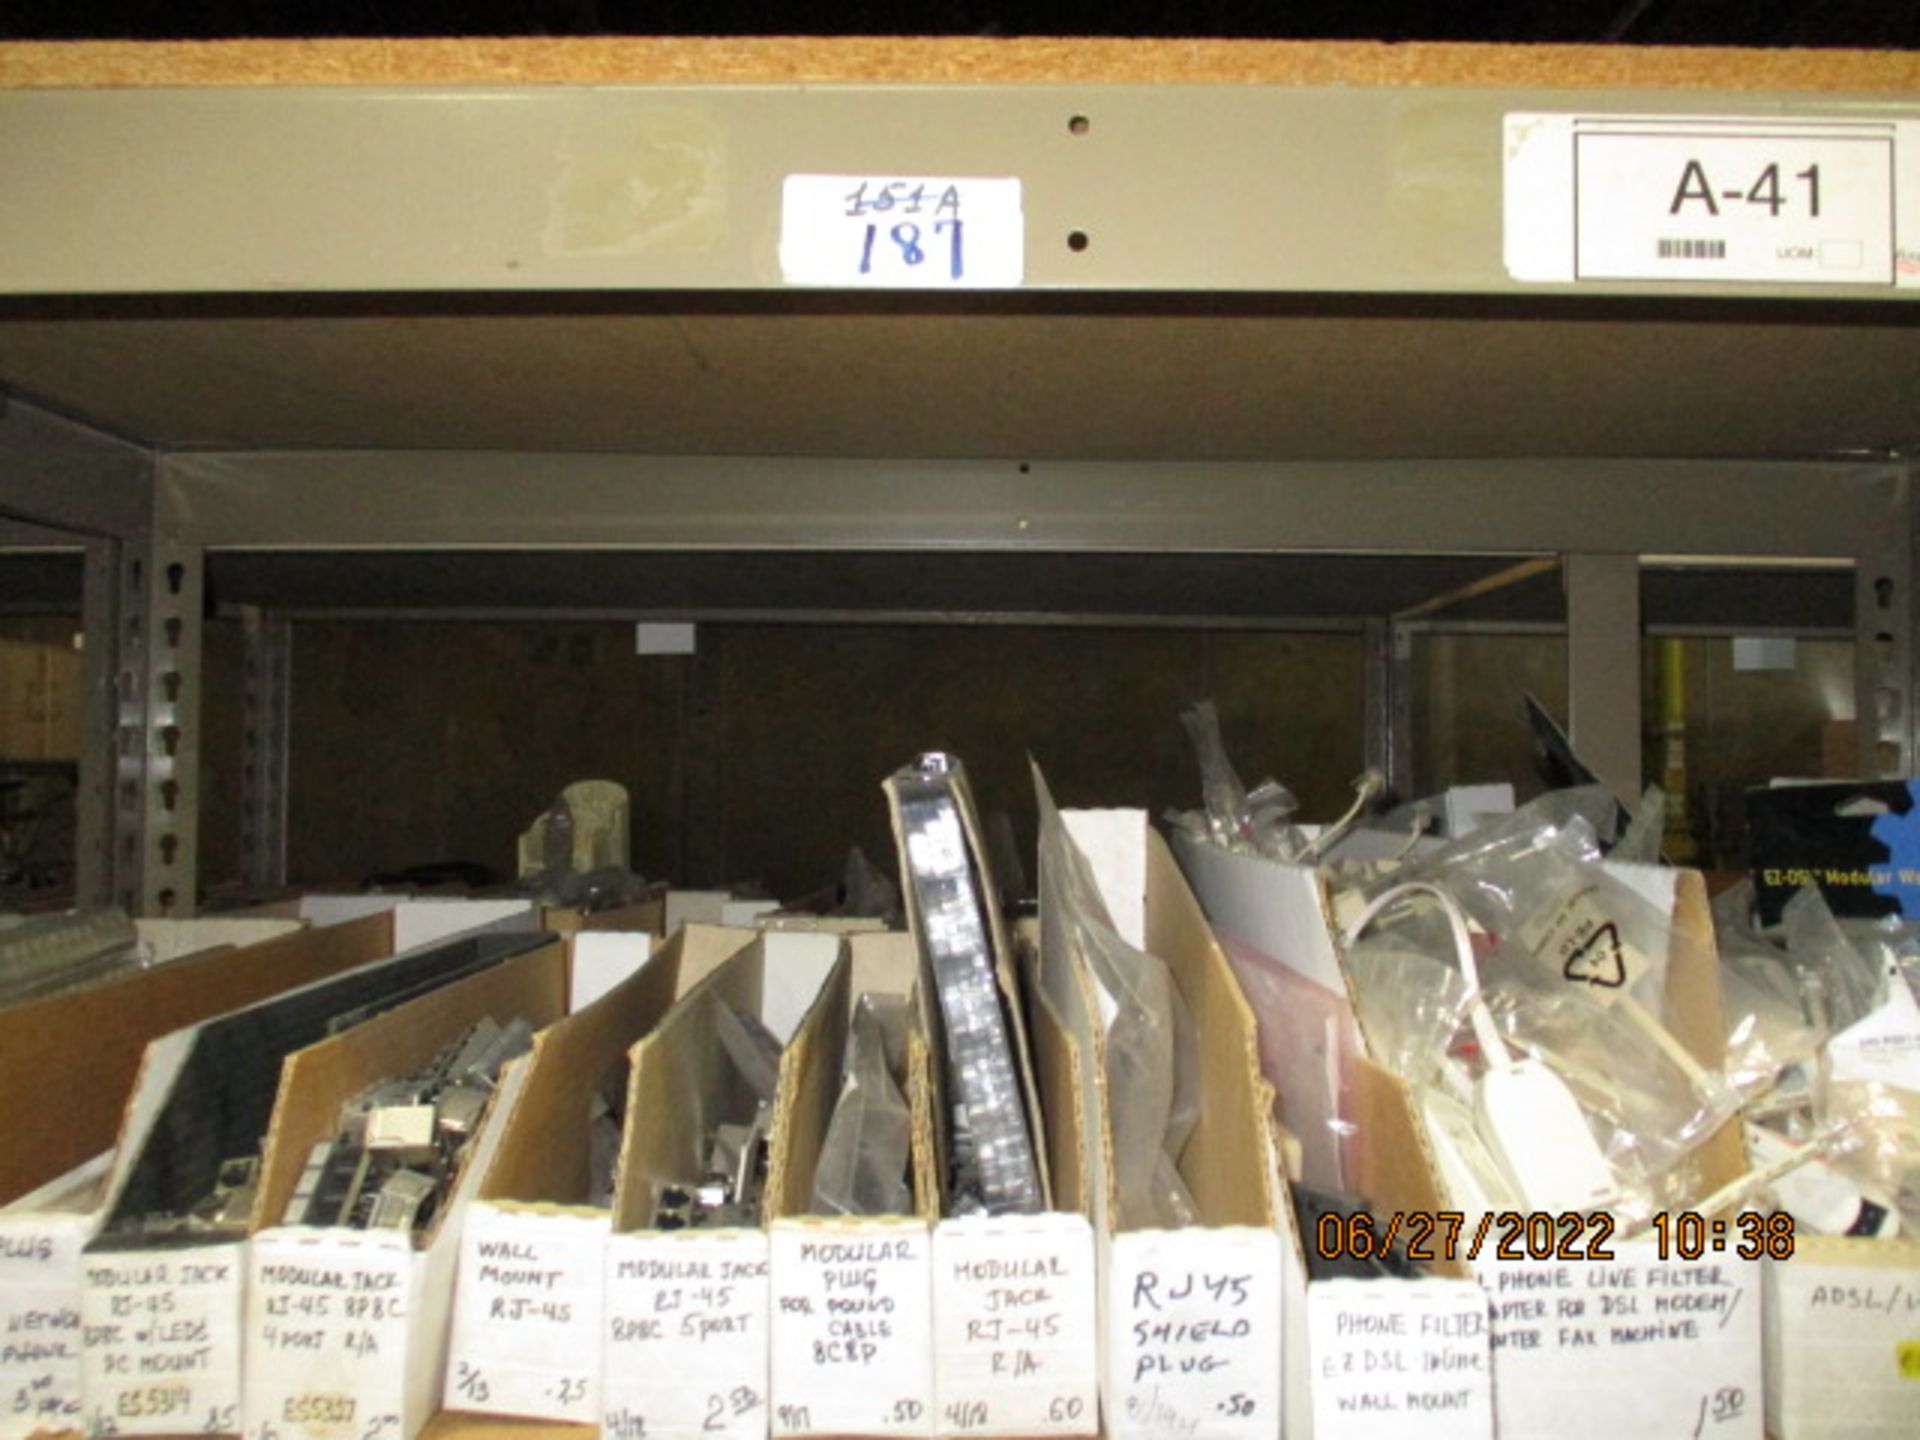 CONTENTS OF SHELVING UNIT CONSISTING OF FACE PLATES, PHONE BOXES, SWITCH PLATE COVERS, WALL - Image 2 of 6